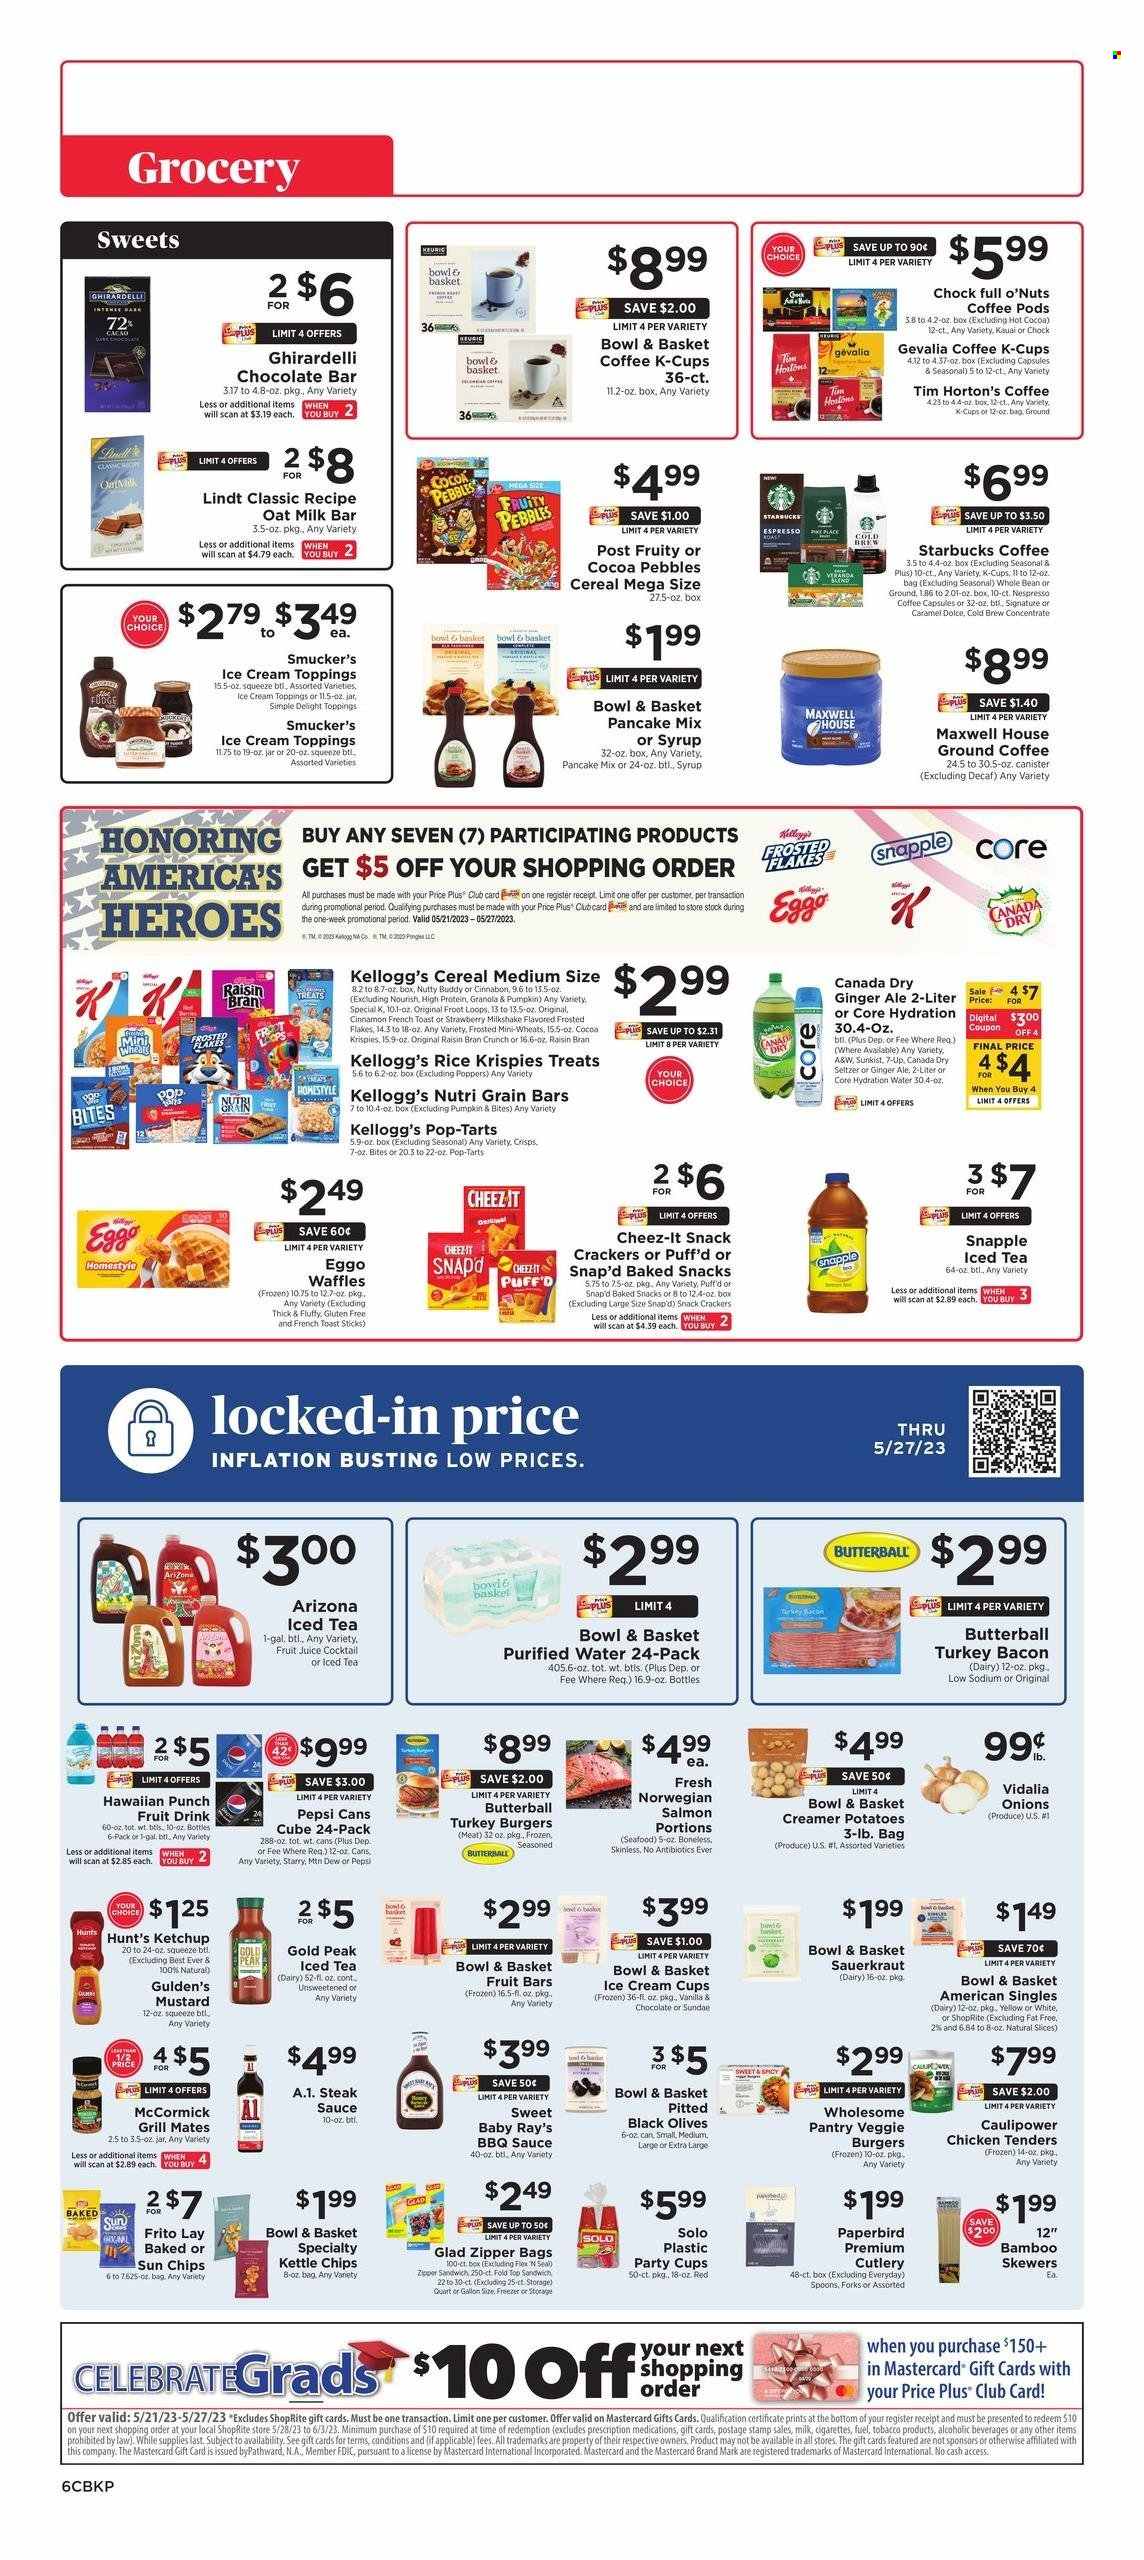 thumbnail - ShopRite Flyer - 05/21/2023 - 05/27/2023 - Sales products - Bowl & Basket, waffles, pancake mix, potatoes, onion, salmon, seafood, chicken tenders, sandwich, sauce, veggie burger, ready meal, bacon, Butterball, turkey bacon, snack, milkshake, oat milk, ice cream, fruit bar, Lindt, crackers, Kellogg's, Milkybar, Pop-Tarts, Ghirardelli, chocolate bar, Cheez-It, Kettle chips, sauerkraut, olives, pickled cabbage, cereals, granola, Rice Krispies, Frosted Flakes, Fruity Pebbles, Raisin Bran, Nutri-Grain, cinnamon, BBQ sauce, mustard, steak sauce, ketchup, Canada Dry, ginger ale, Mountain Dew, Pepsi, juice, fruit juice, fruit drink, ice tea, soft drink, 7UP, AriZona, Snapple, A&W, seltzer water, purified water, water, hot cocoa, Maxwell House, coffee pods, Starbucks, Nespresso, ground coffee, coffee capsules, K-Cups, Gevalia, steak, turkey burger, spoon, party cups. Page 6.